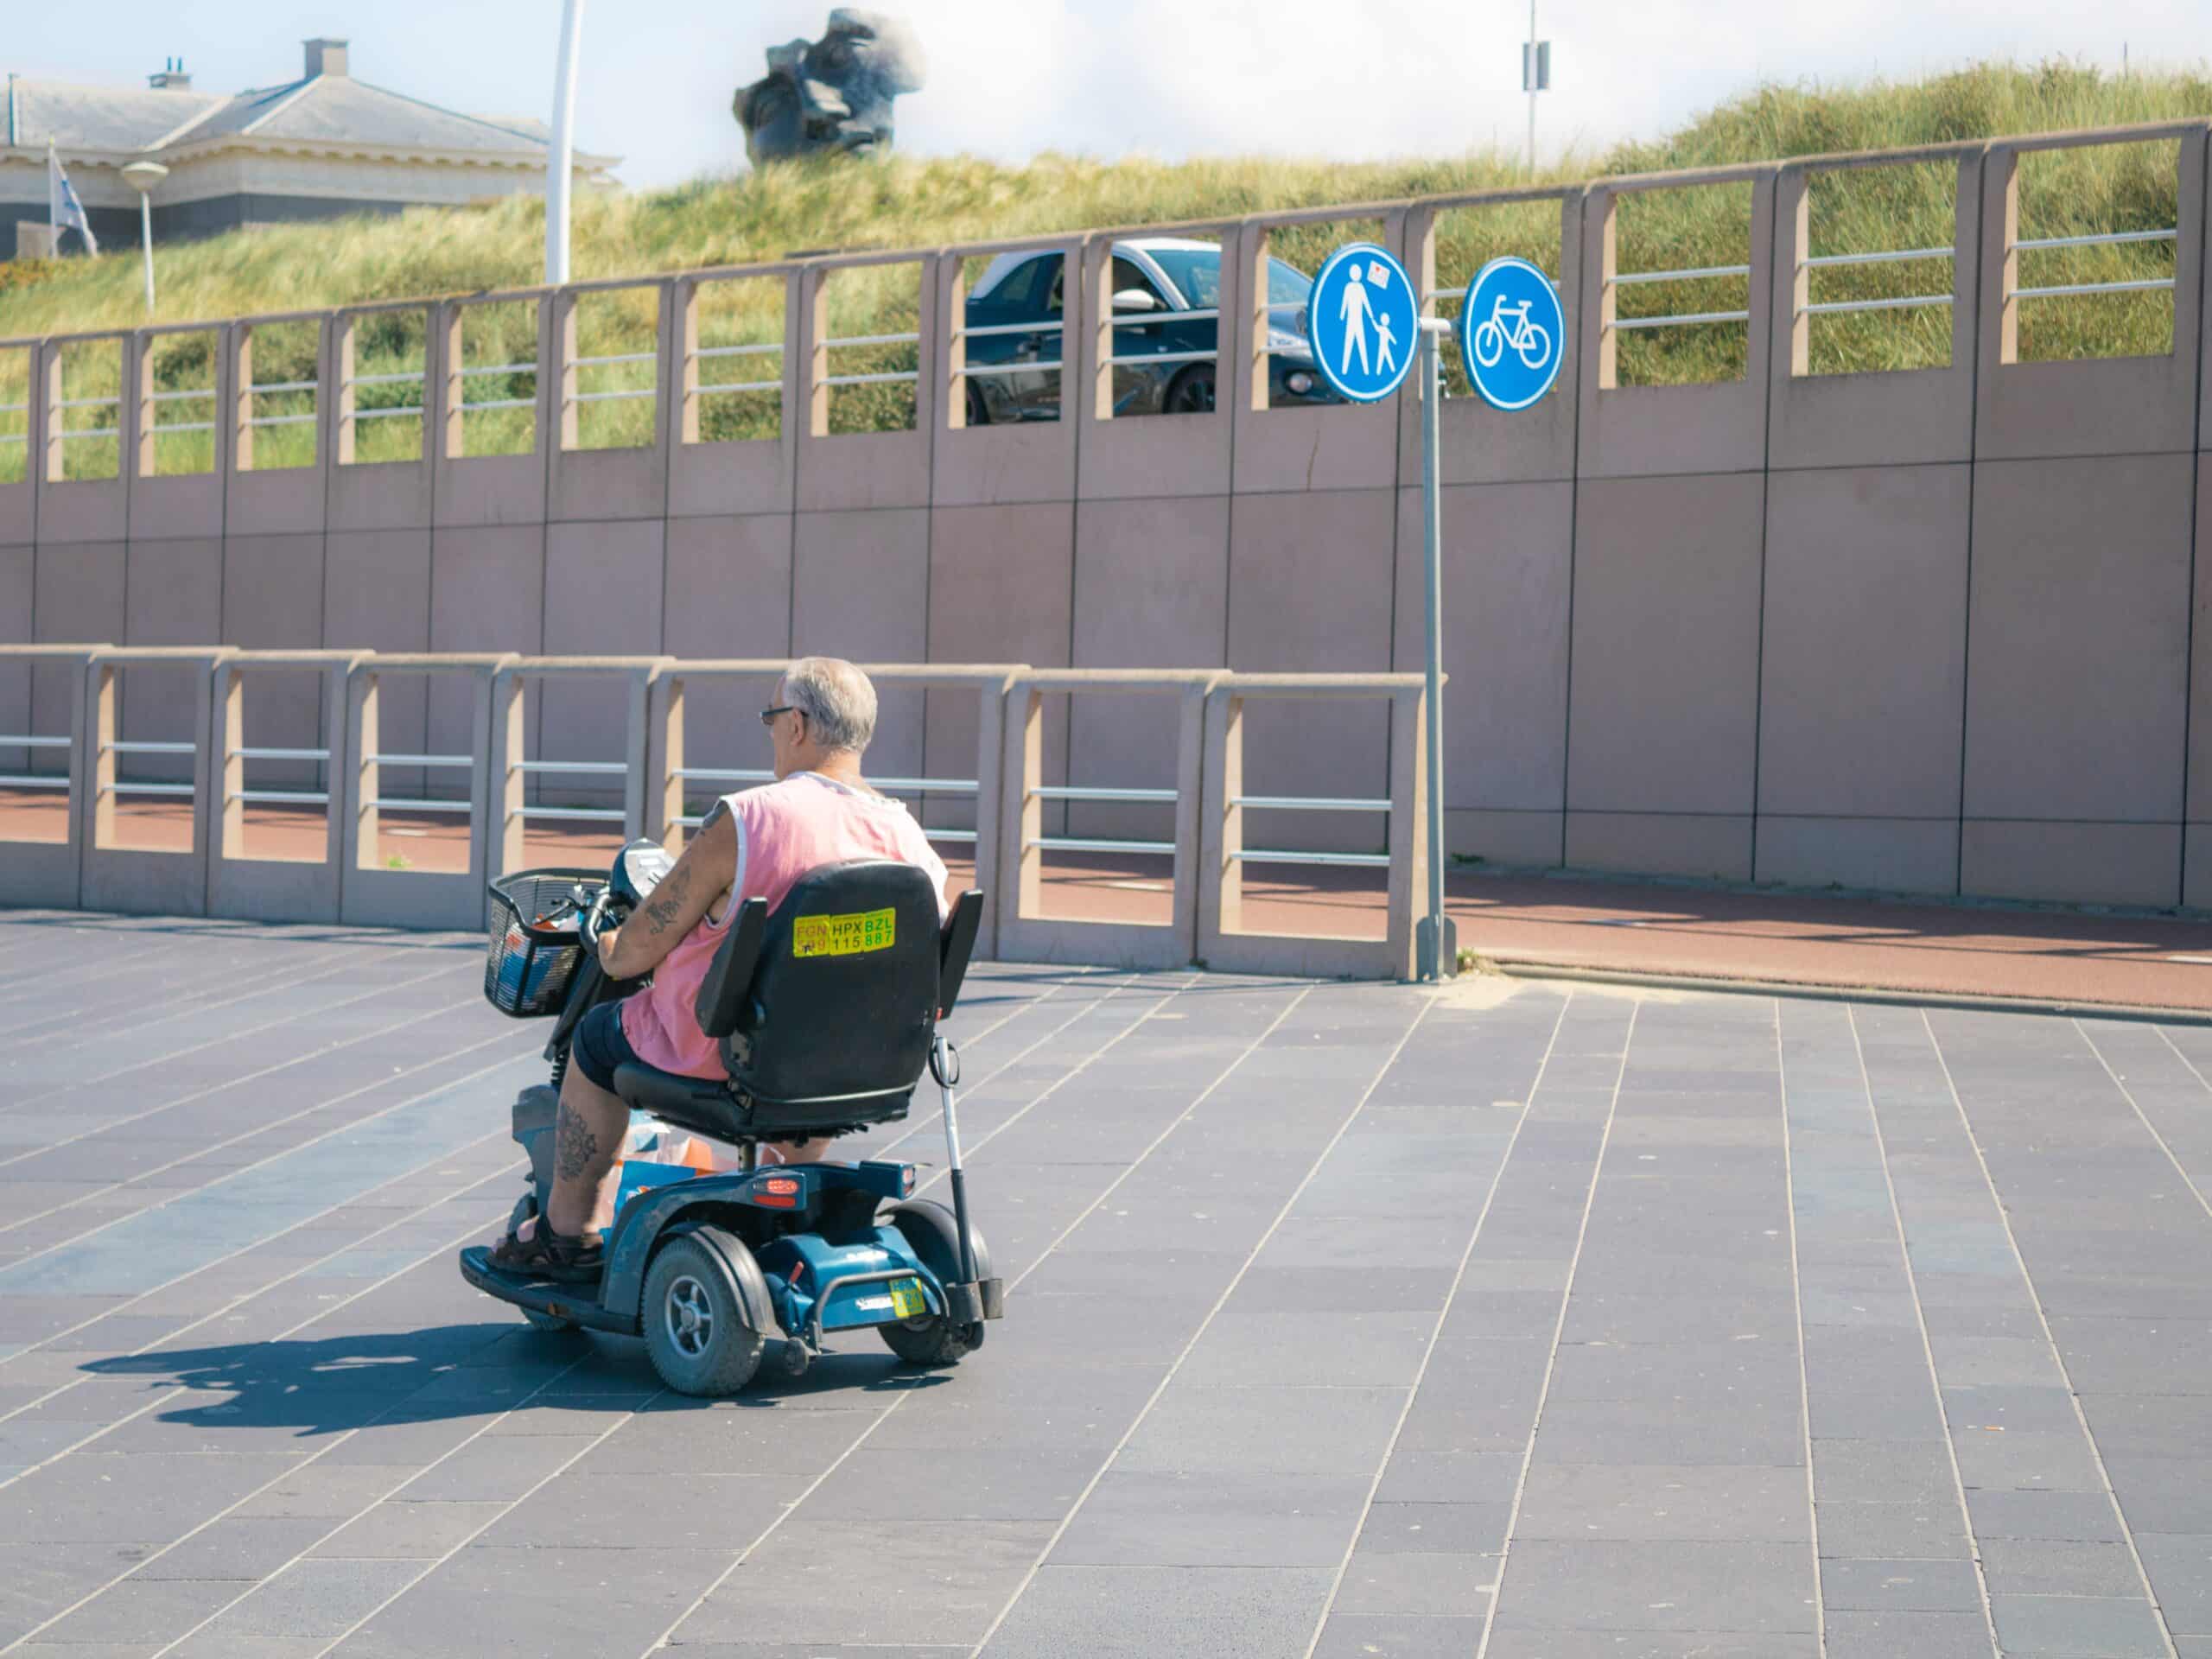 Cars reversing out of driveways are the biggest safety concern for mobility scooter users in Australia.